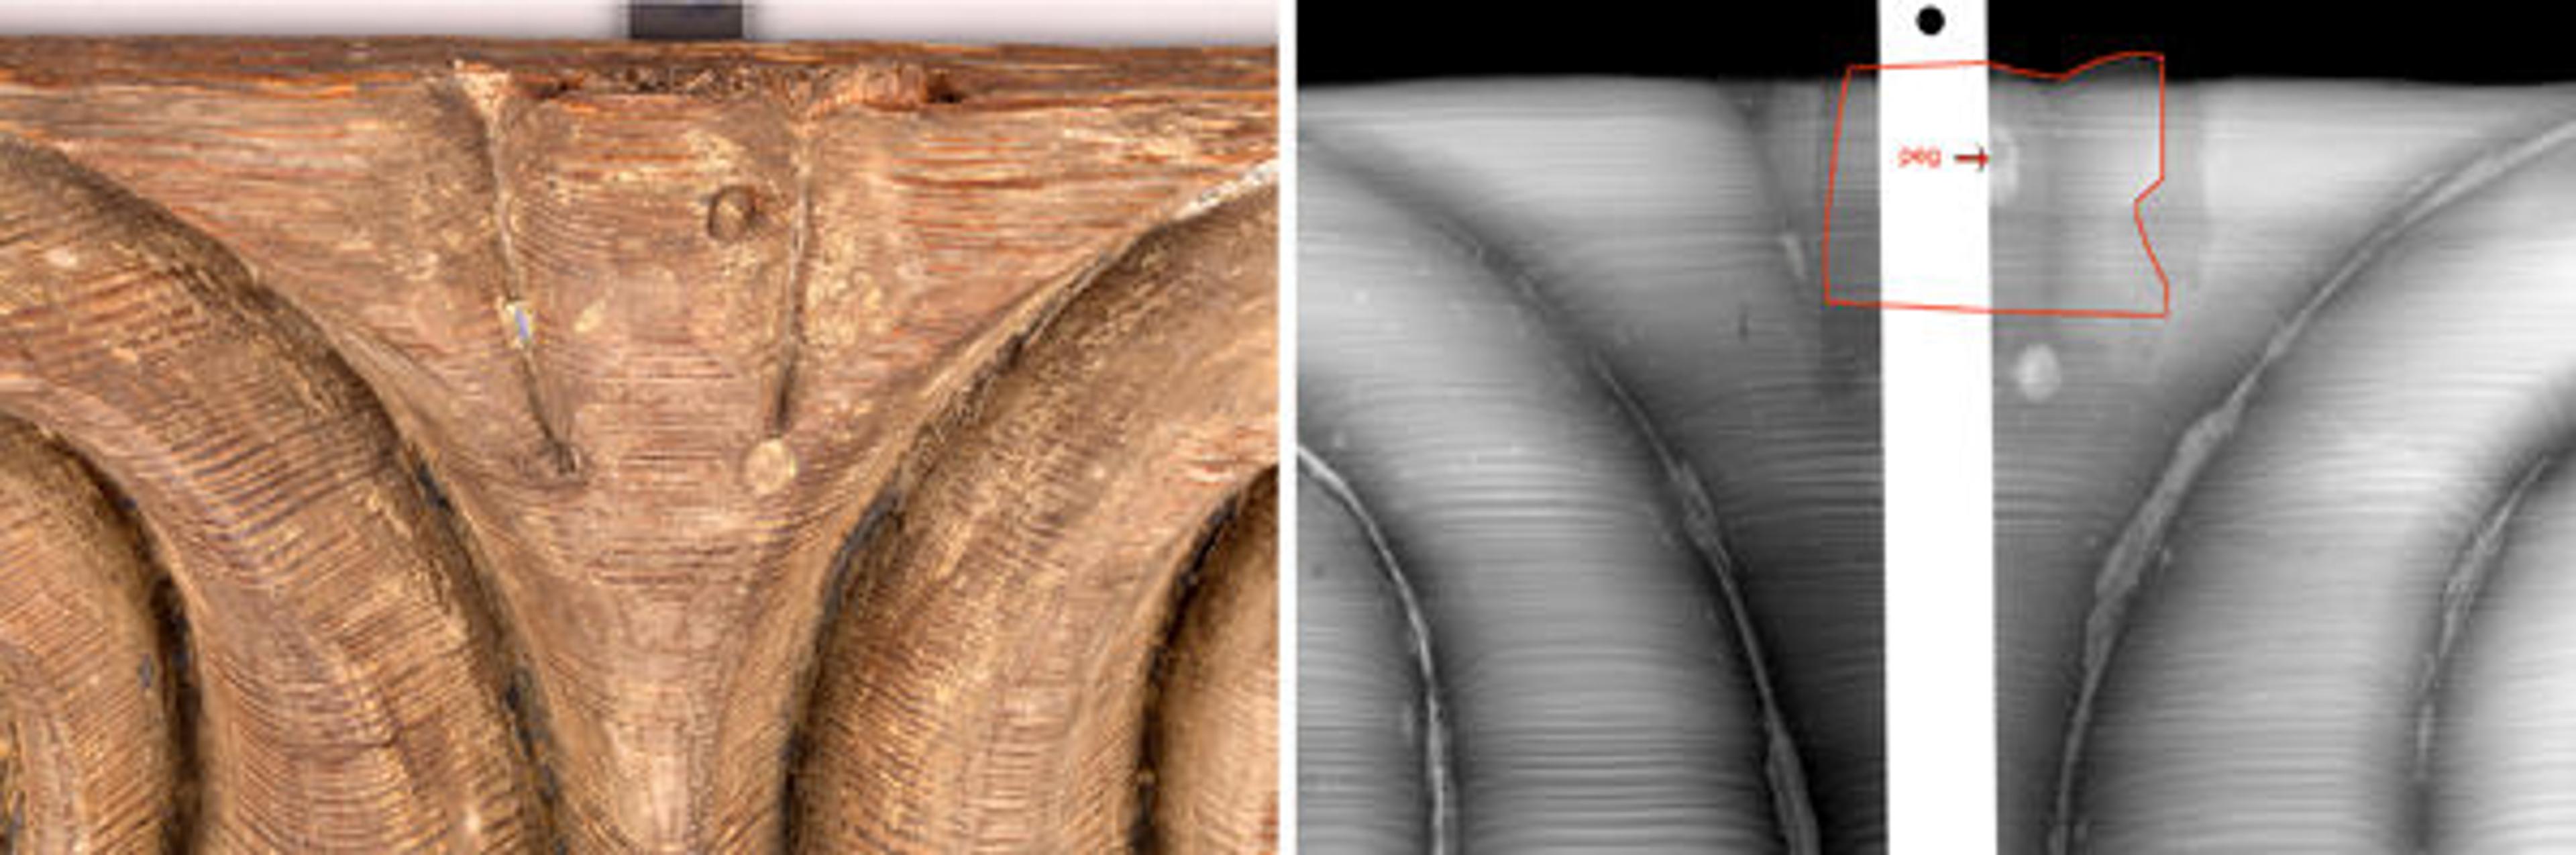 Fig. 4. Left: Upper right-hand mortise-and-tenon joint. Right: Radiograph of the joint, showing a red line that marks the outline of the tenon. The peg is partially obscured by the high radiopacity of the metal mount.